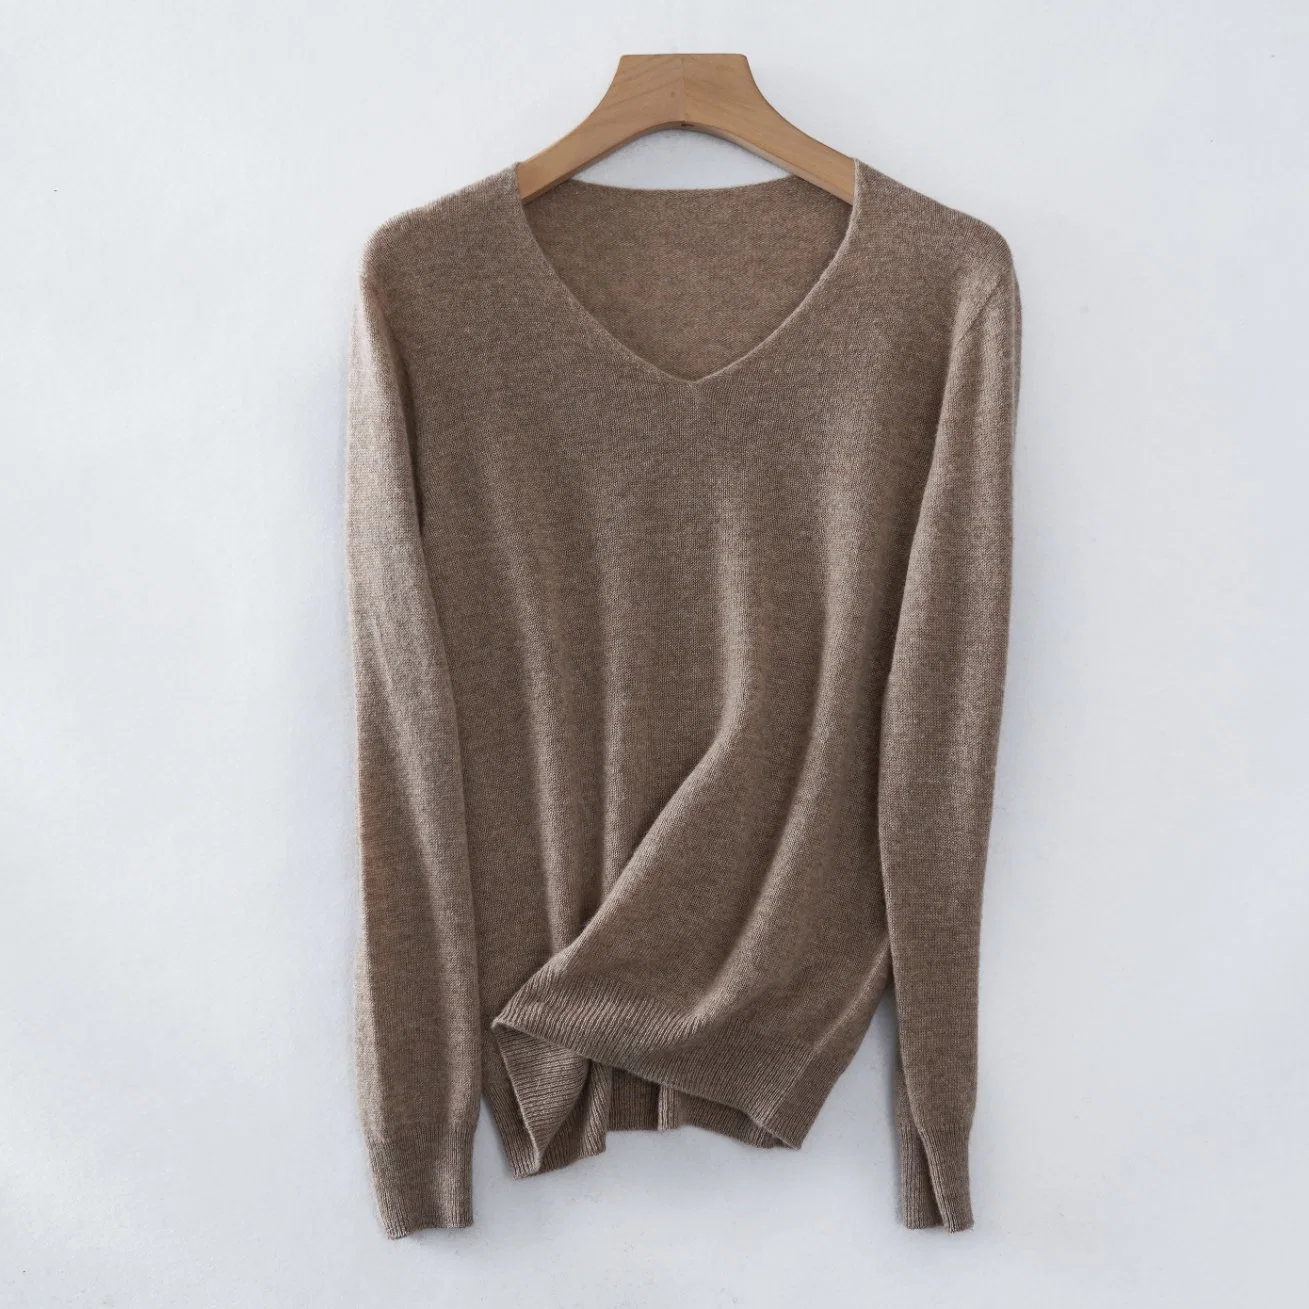 Wholesale Superfine Cashmere and Cotton Blends Woman's Classic V-Neck Pullover Sweater